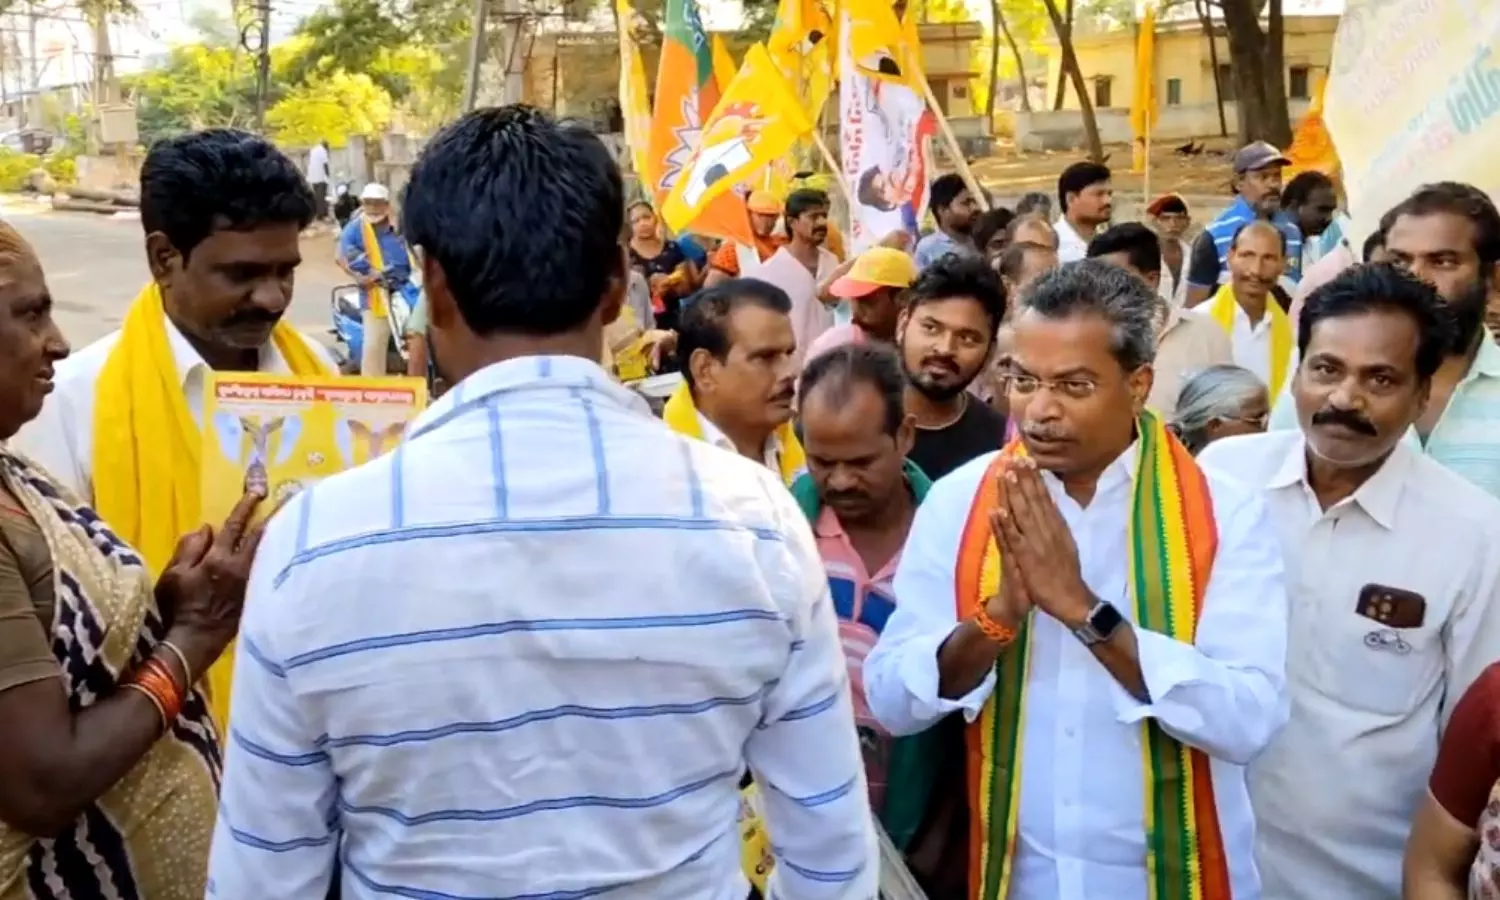 Vasantha Krishna Prasad Is The Candidate Of TDP Is Advancing In The Campaign